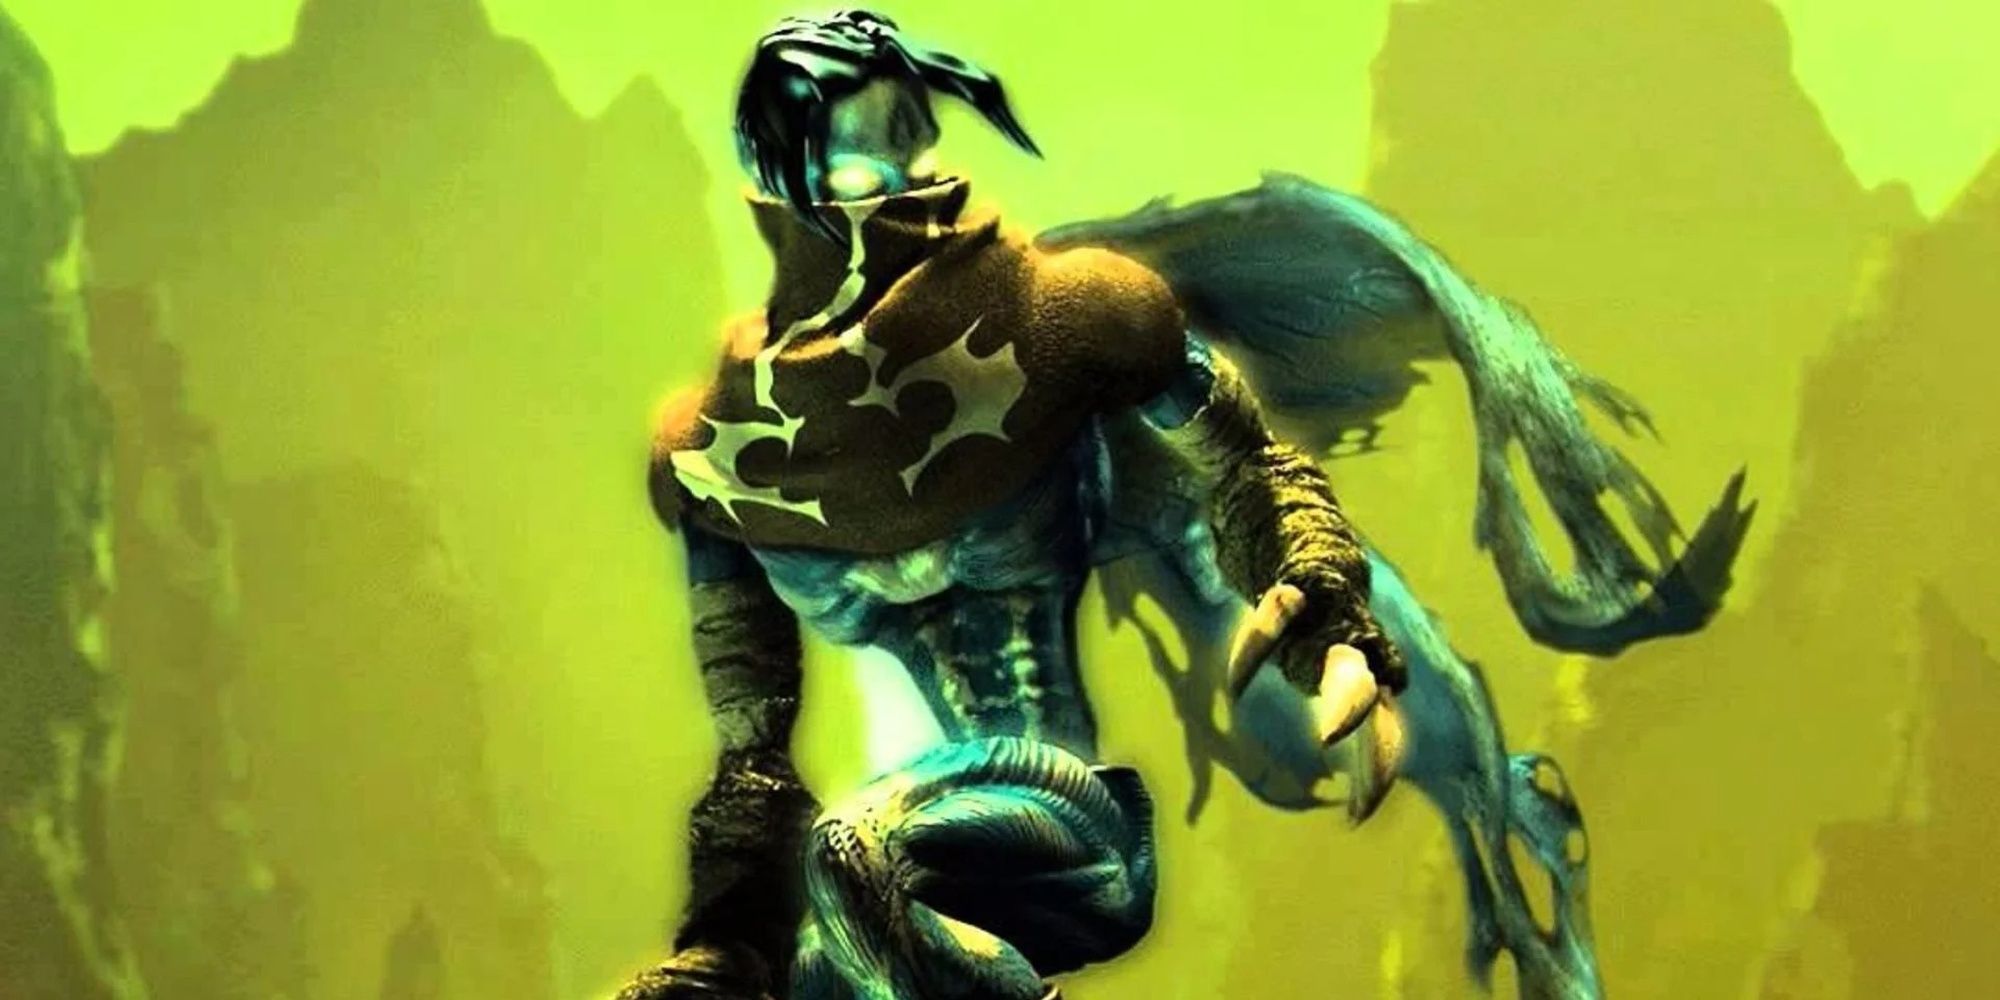 Legacy Of Kain Developer May Be Considering Reboot Or Sequel